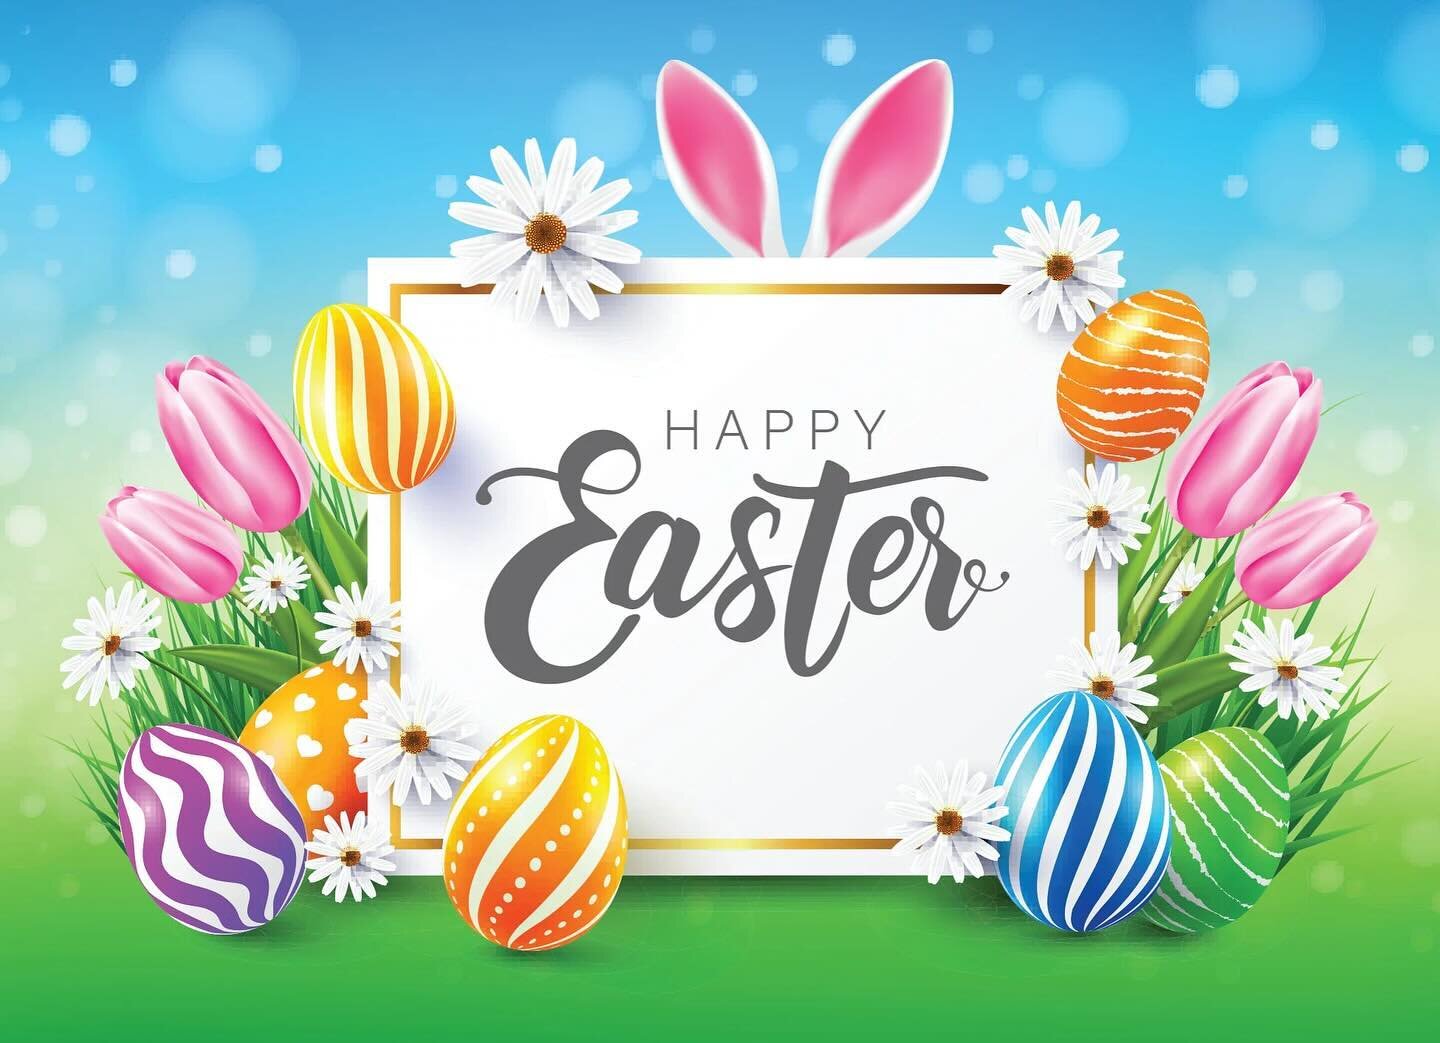 Happy Easter to our Cap City Family! 

We Hope Everyone has a Great Day with their Loved Ones!

🥚 🐰 🐣